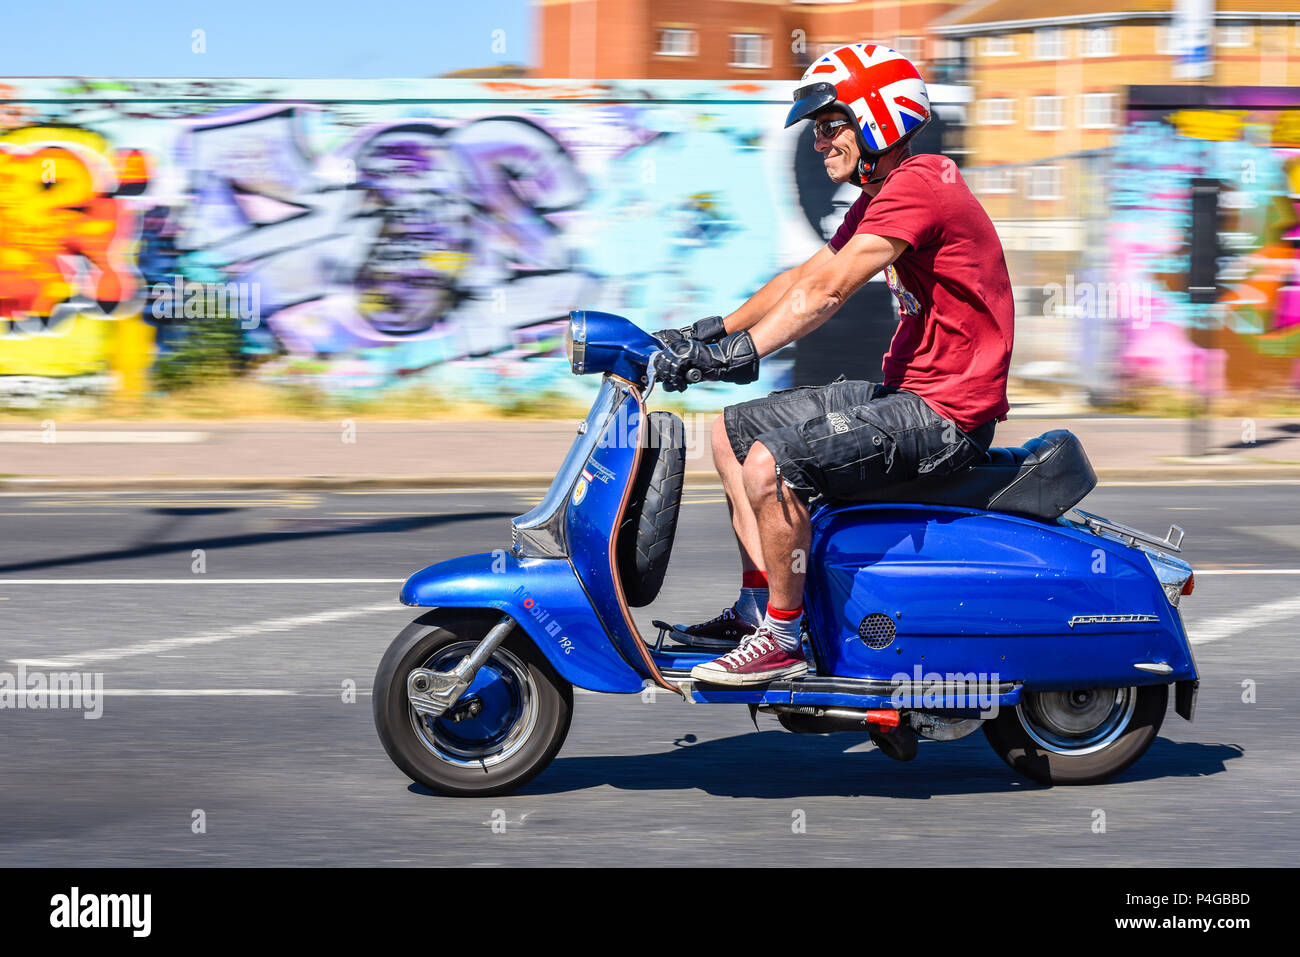 Lambretta Motor scooter rider with British Union Flag helmet riding along  Eastern Esplanade, Southend on Sea, Essex, UK. Sunny warm weather in  Southend. Bright colours graffiti Stock Photo - Alamy